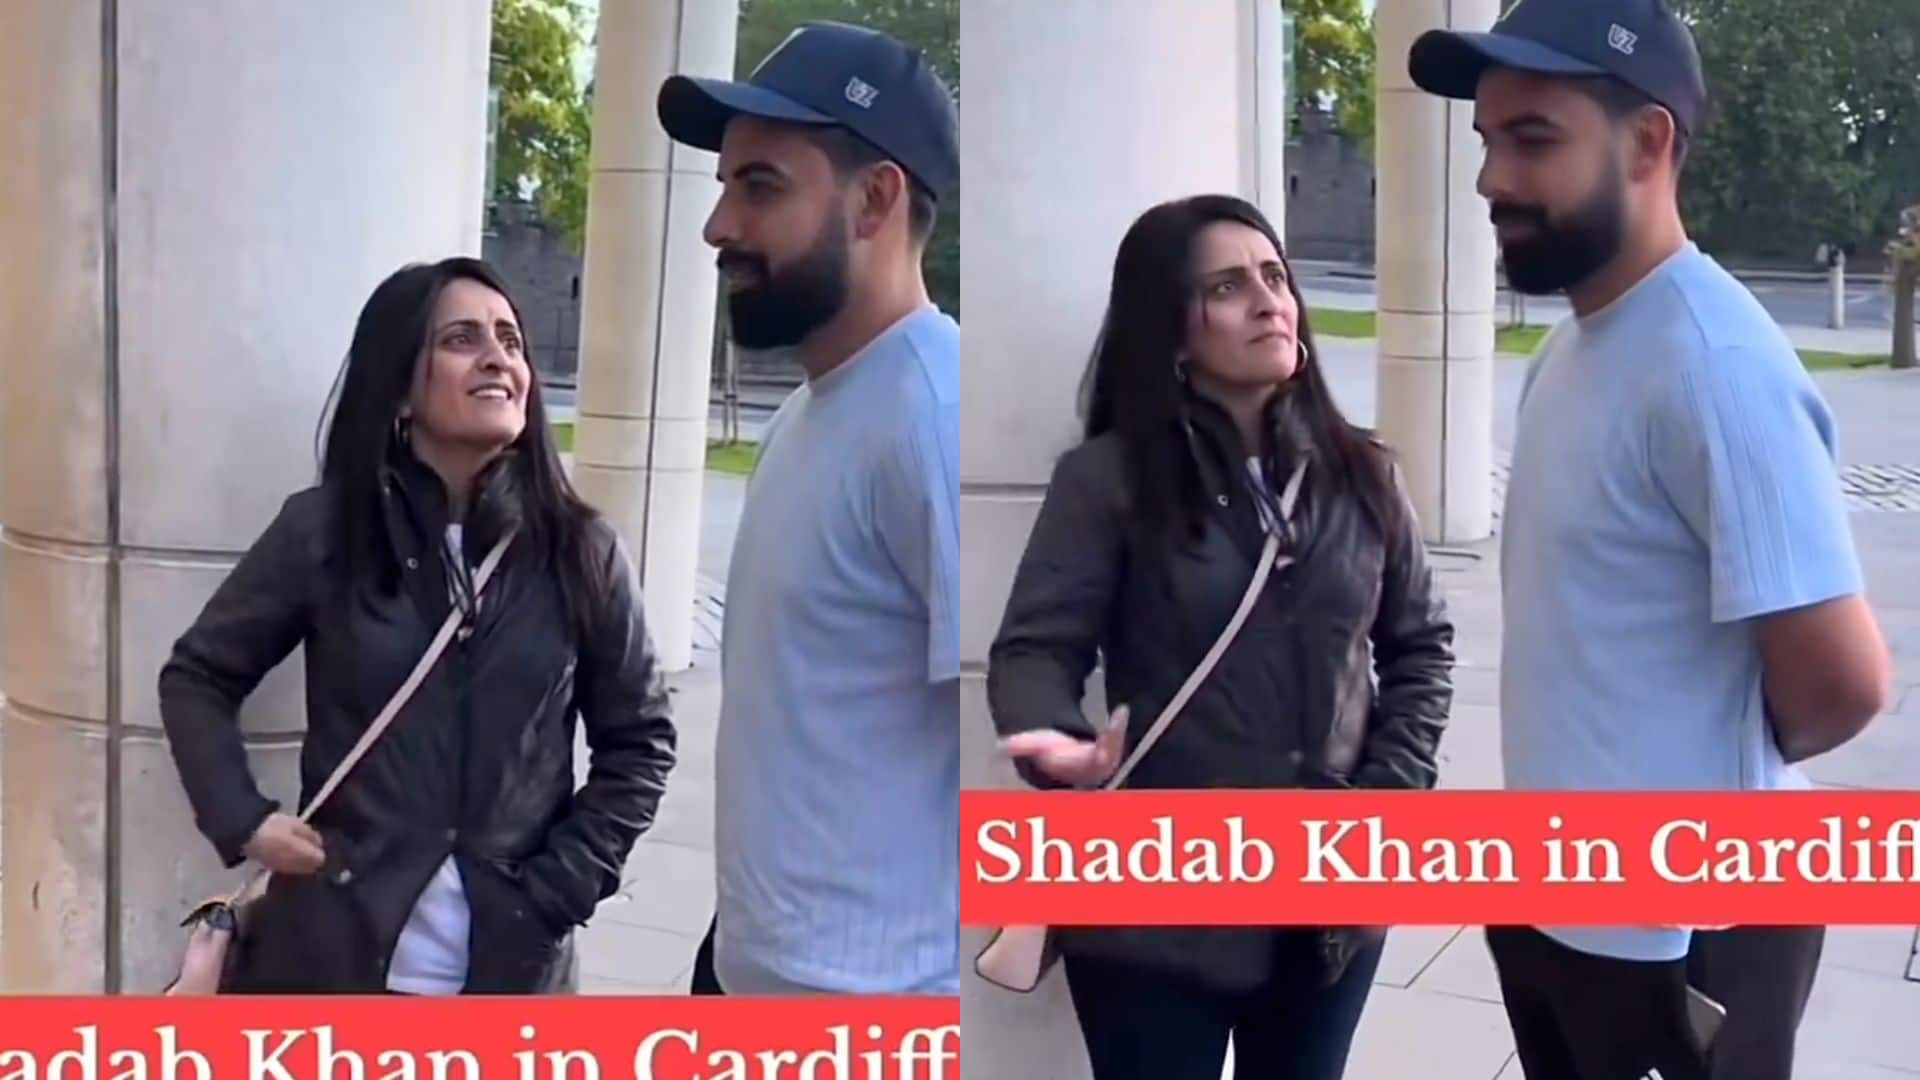 Shadab's interaction with the fan [X]